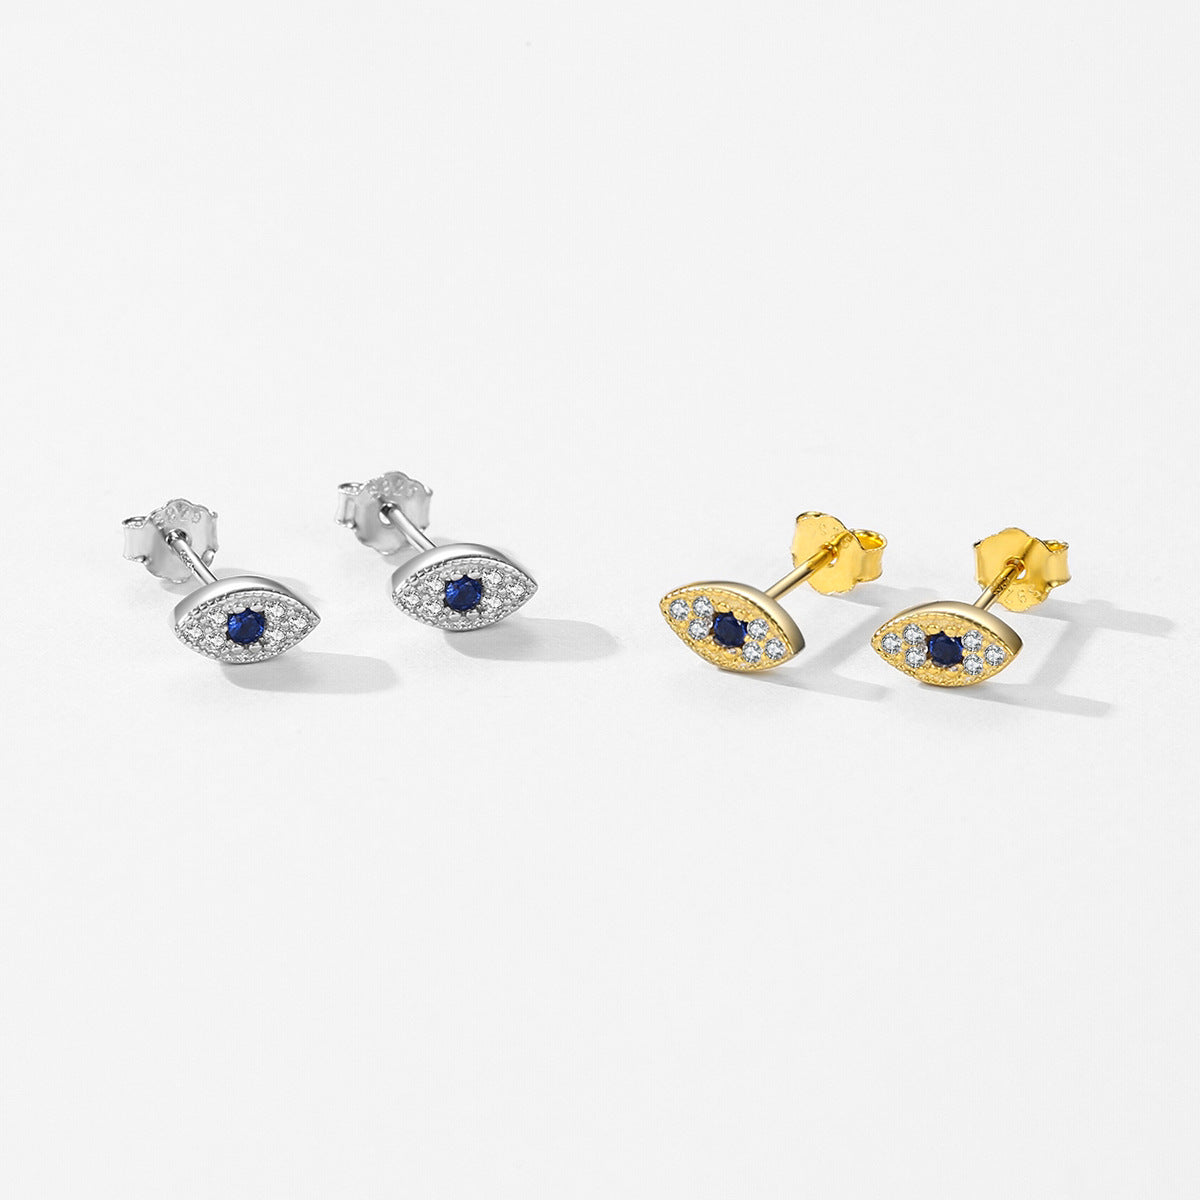 Exquisite Devil's Eye Earrings, S925 Sterling Silver with Zircons